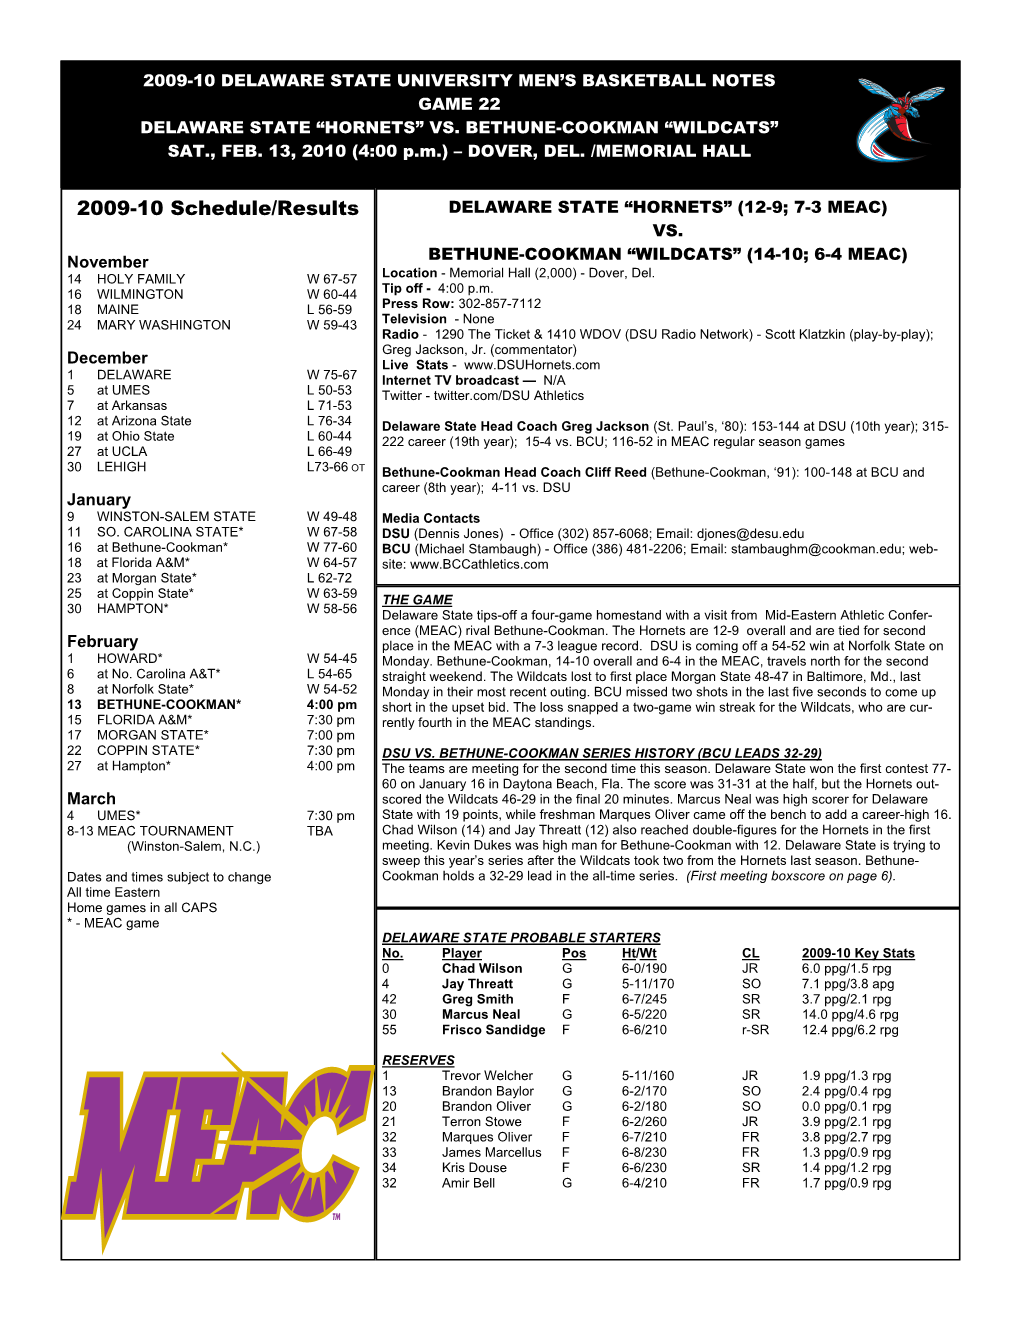 2009-10 Schedule/Results DELAWARE STATE “HORNETS” (12-9; 7-3 MEAC) VS